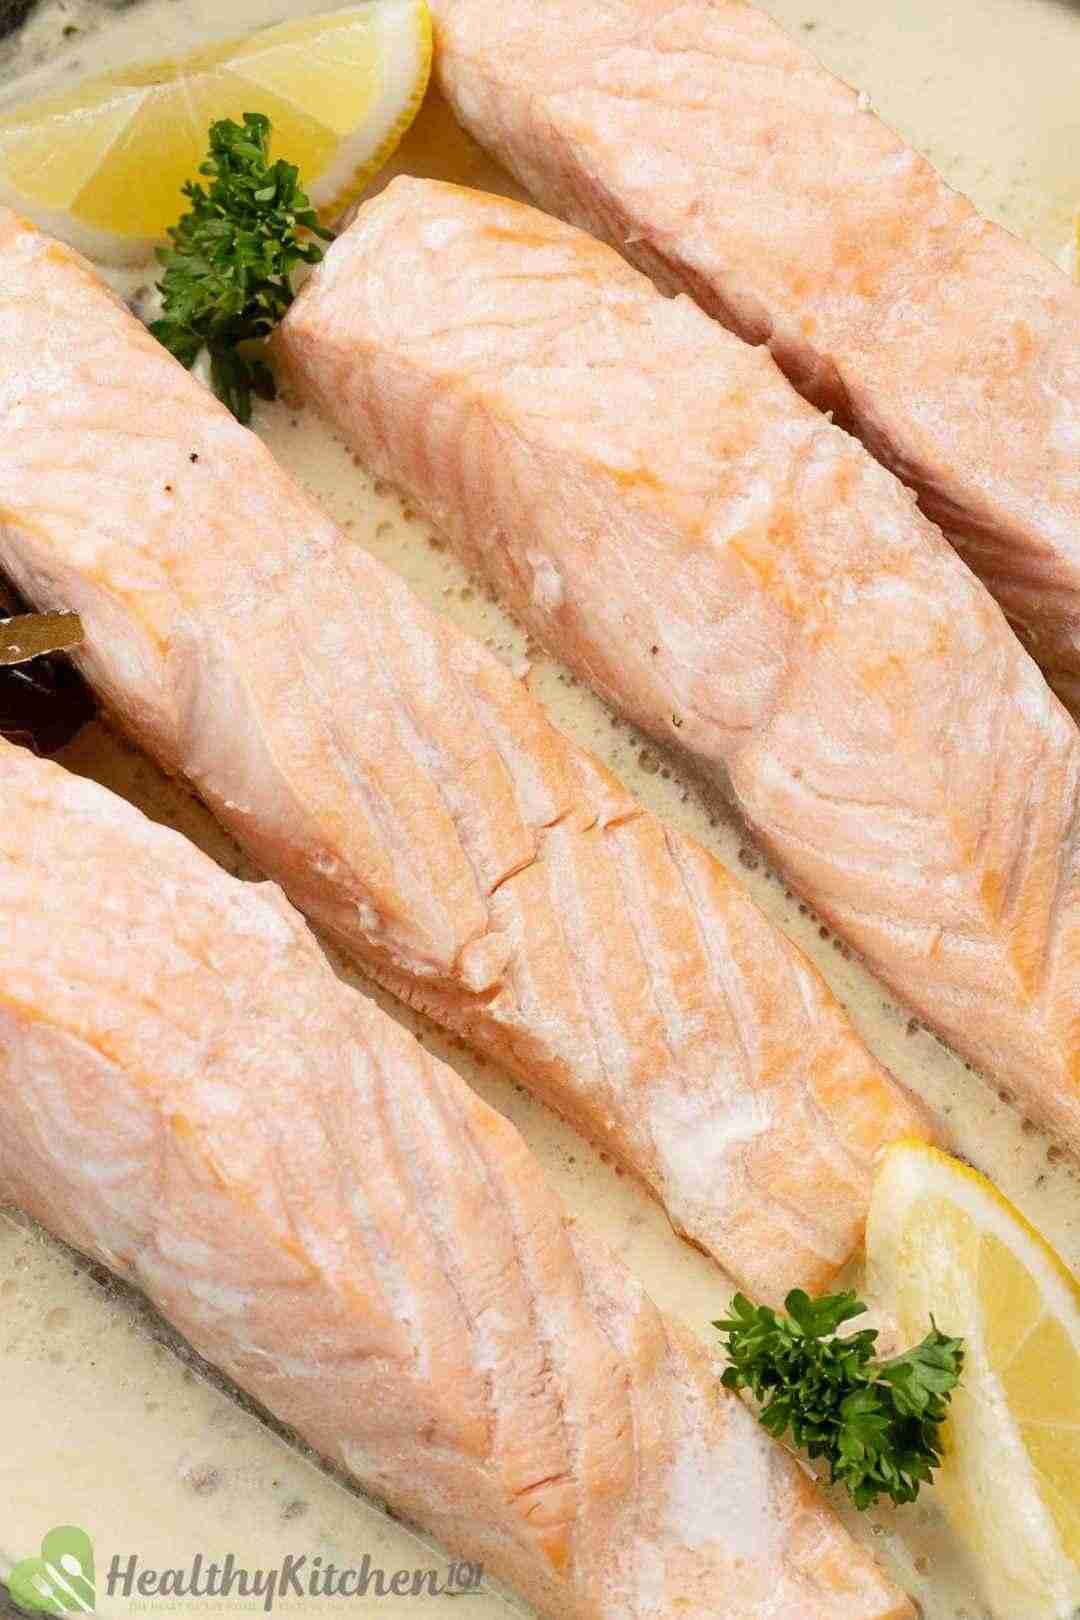 Poached Salmon Recipe - A Simple, Healthy Way to Cook Salmon